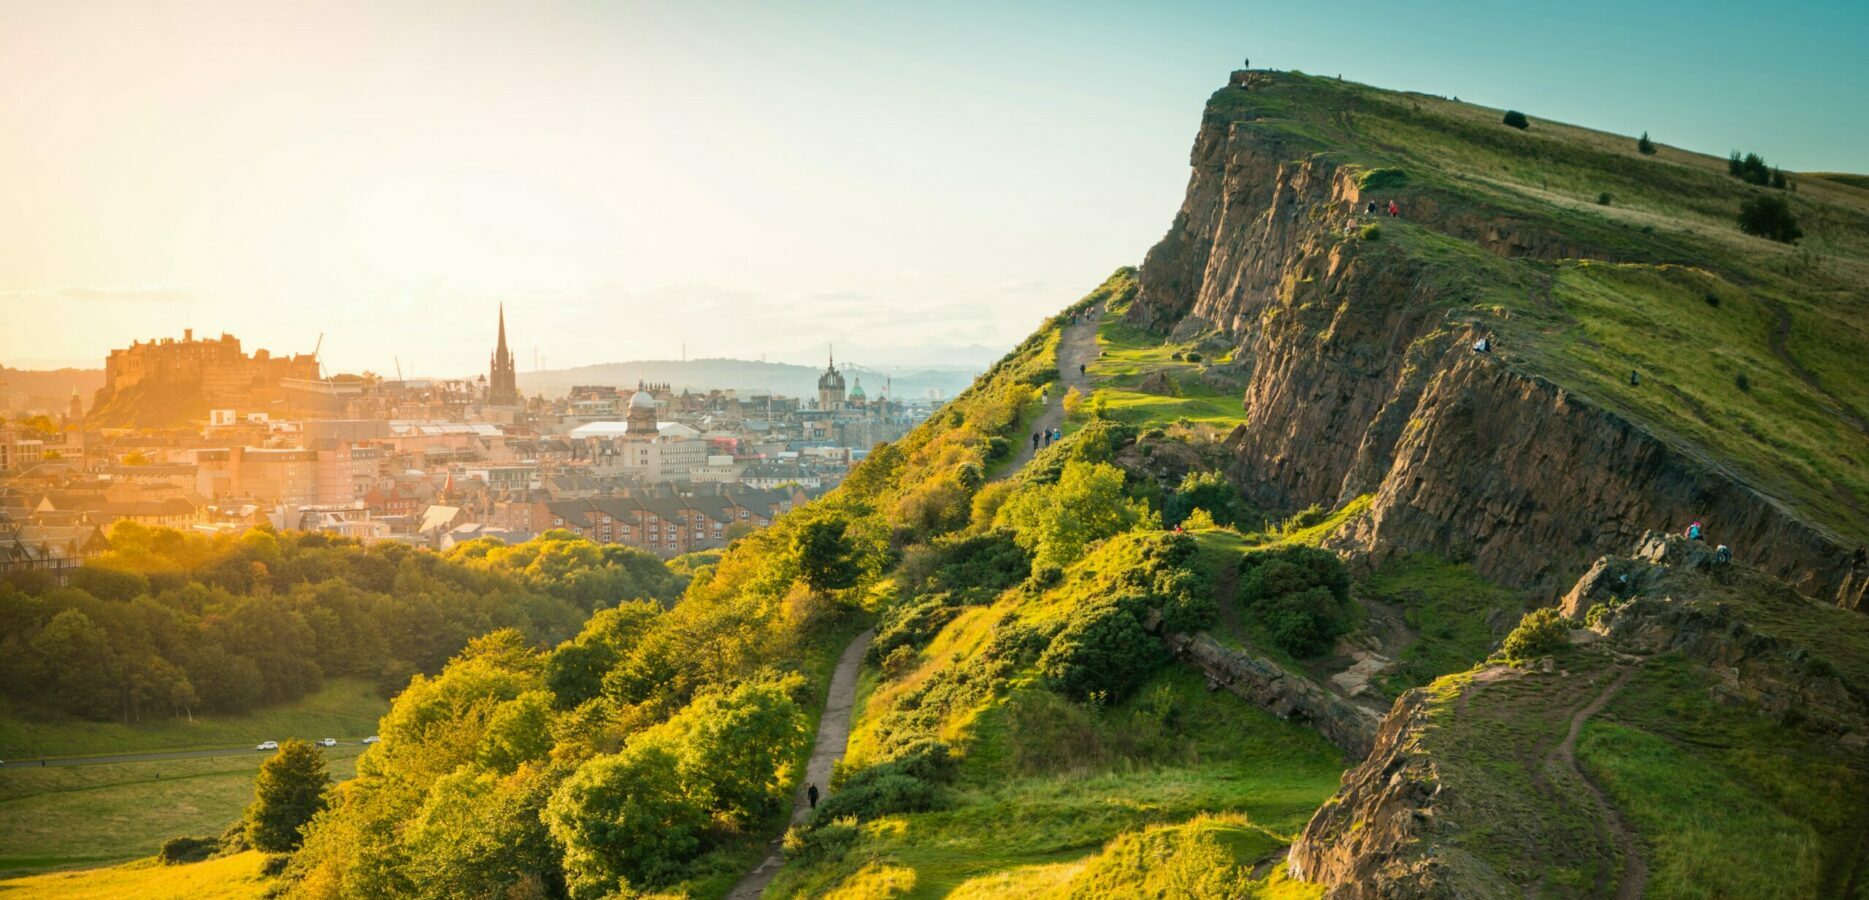 Arthur's Seat in Edinburgh, a key UK destination for employers with sponsor duties and compliance obligations